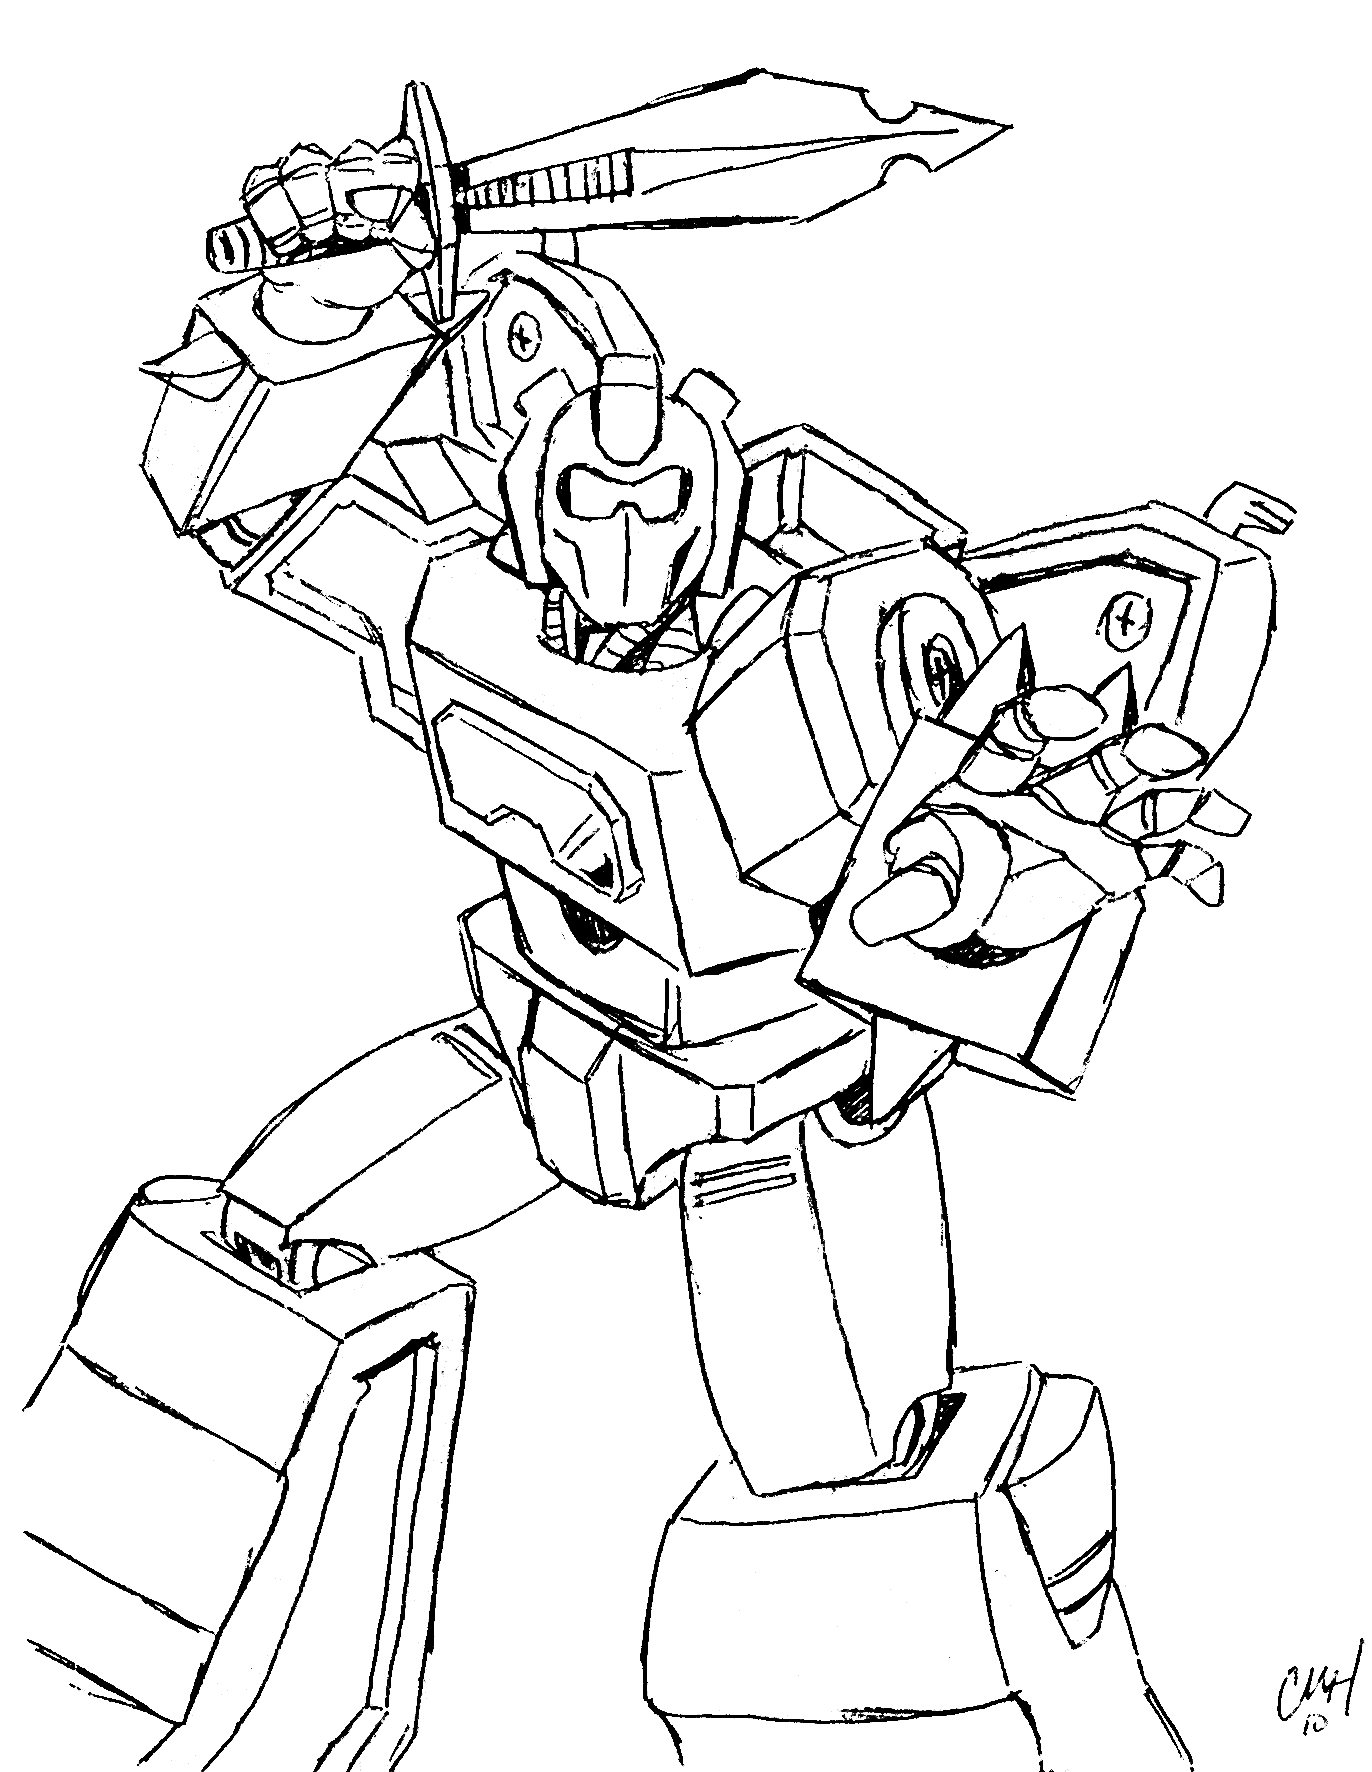 Free Printable Transformers Coloring Pages For Kids - Transformers 4 Coloring Pages Free Printable